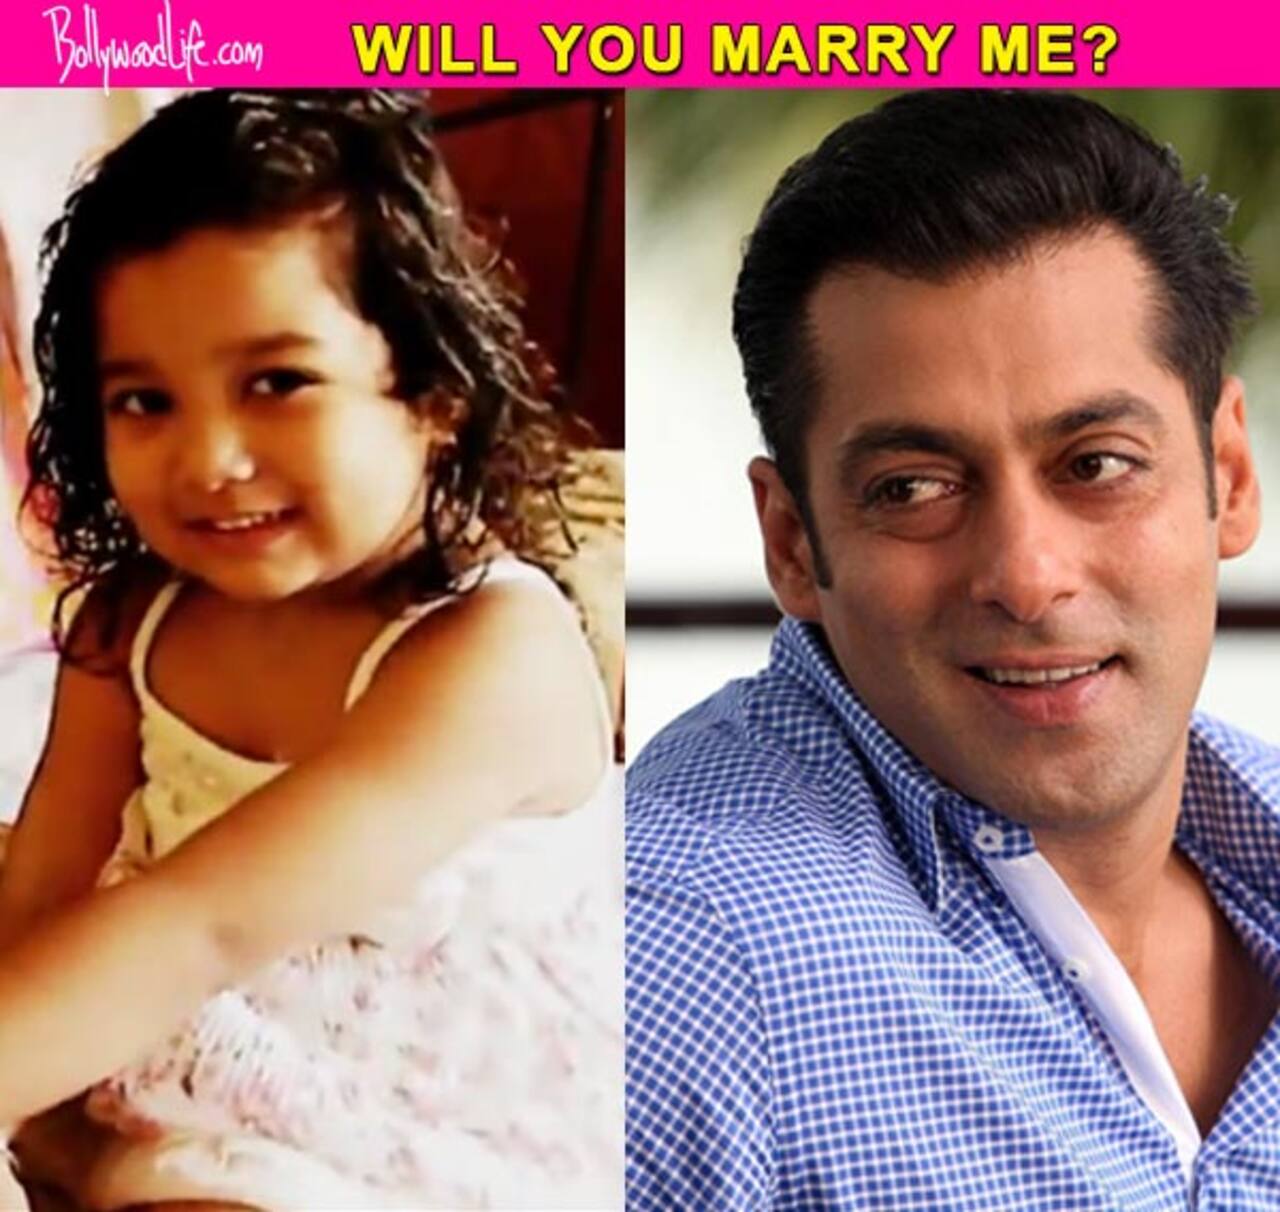 Salman Khan We Bet This Marriage Proposal Will Make You Ditch The Sexiest Bachelor Tag Watch 